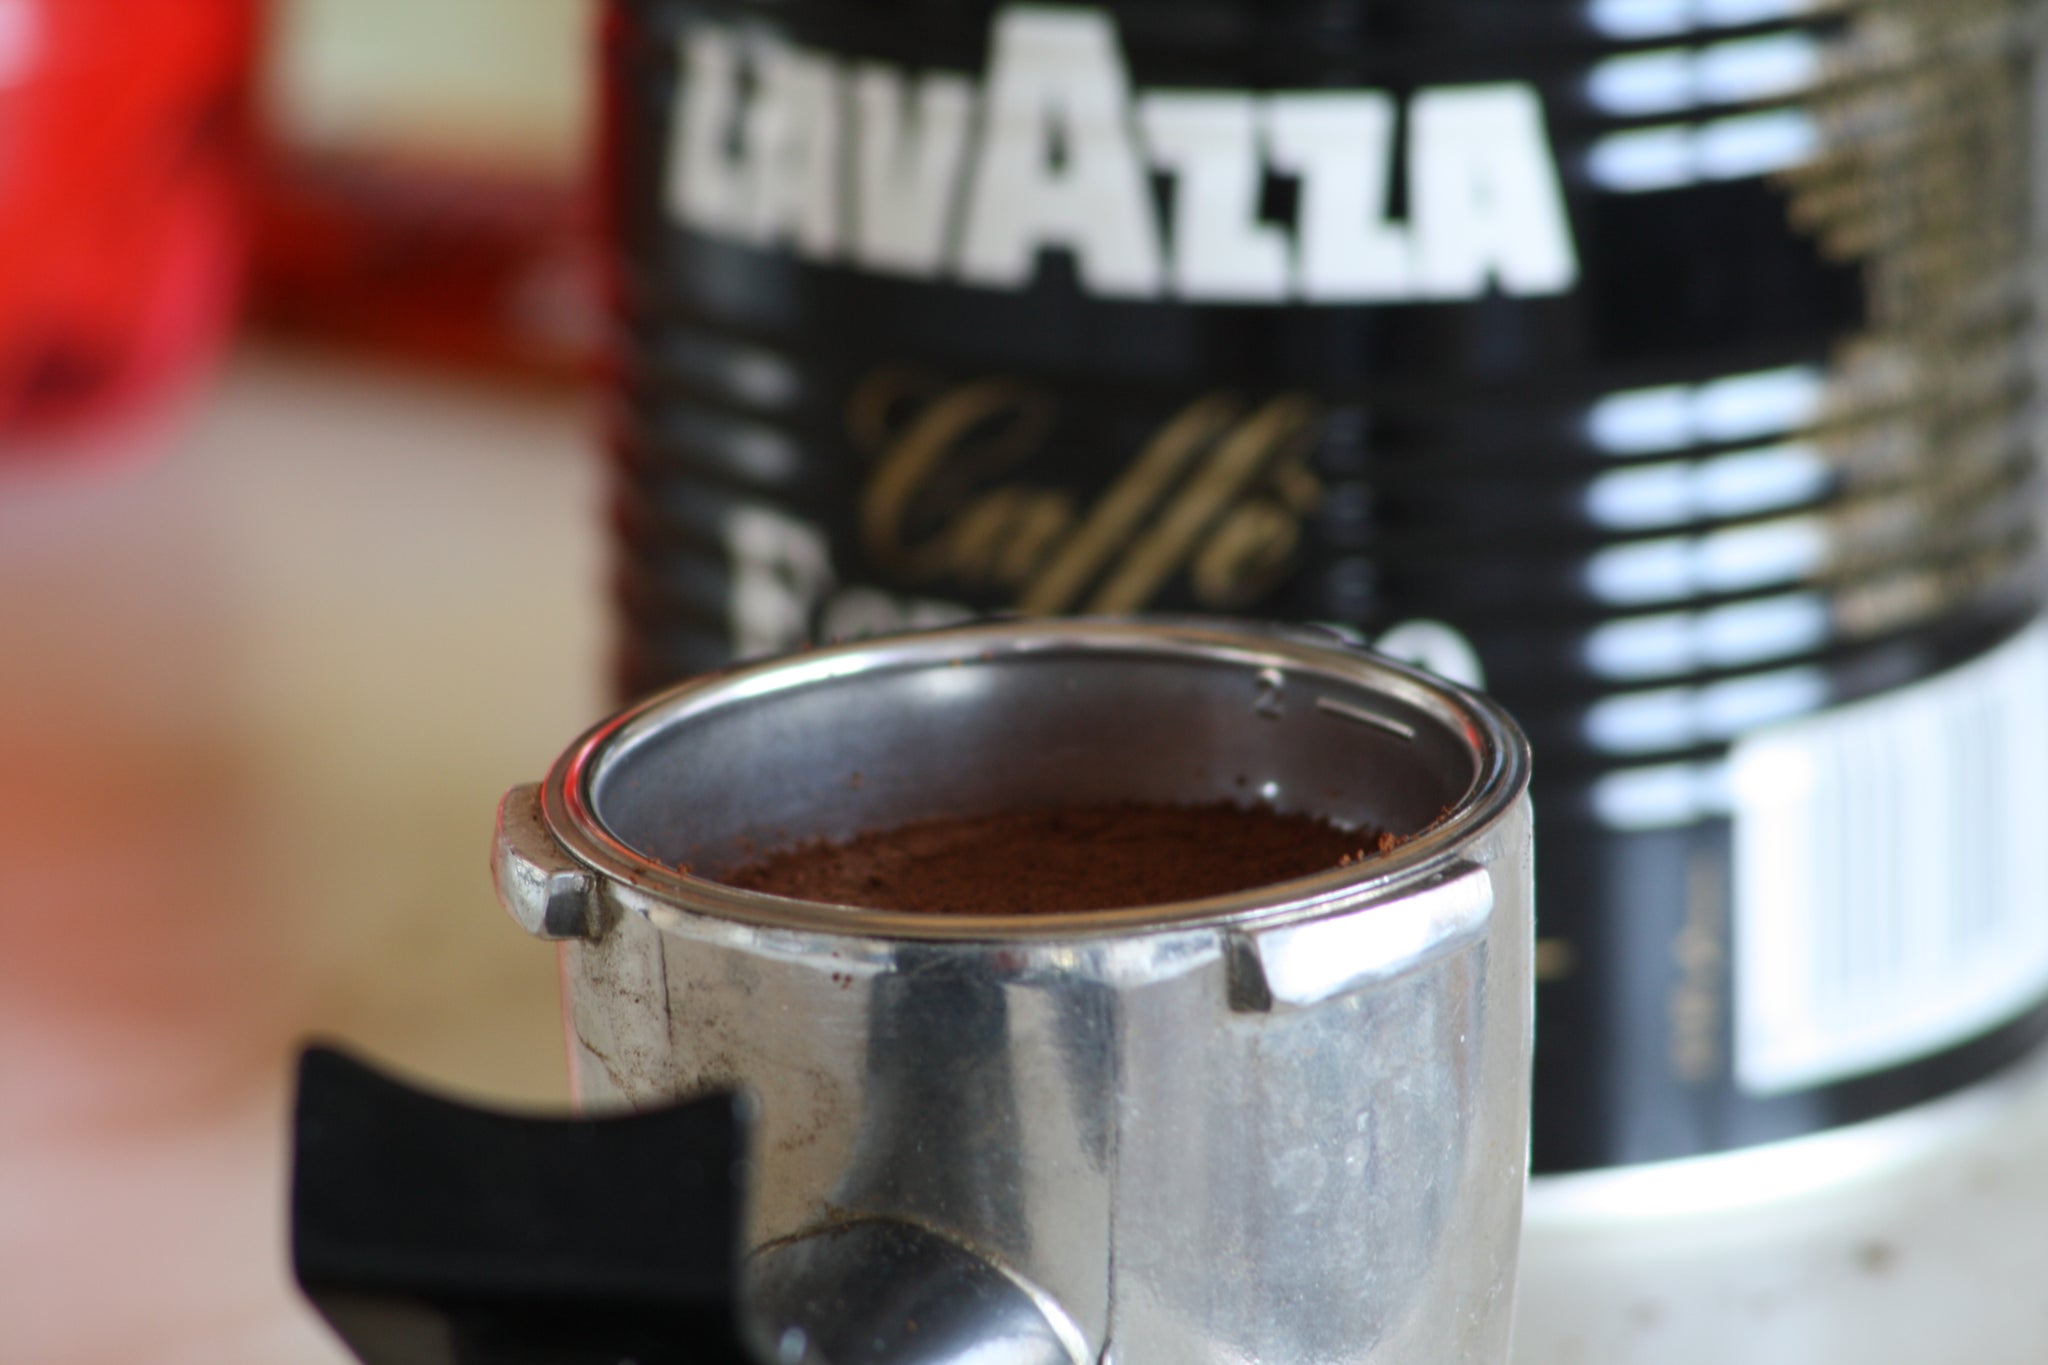 Lavazza Coffee purchases Mars Drinks